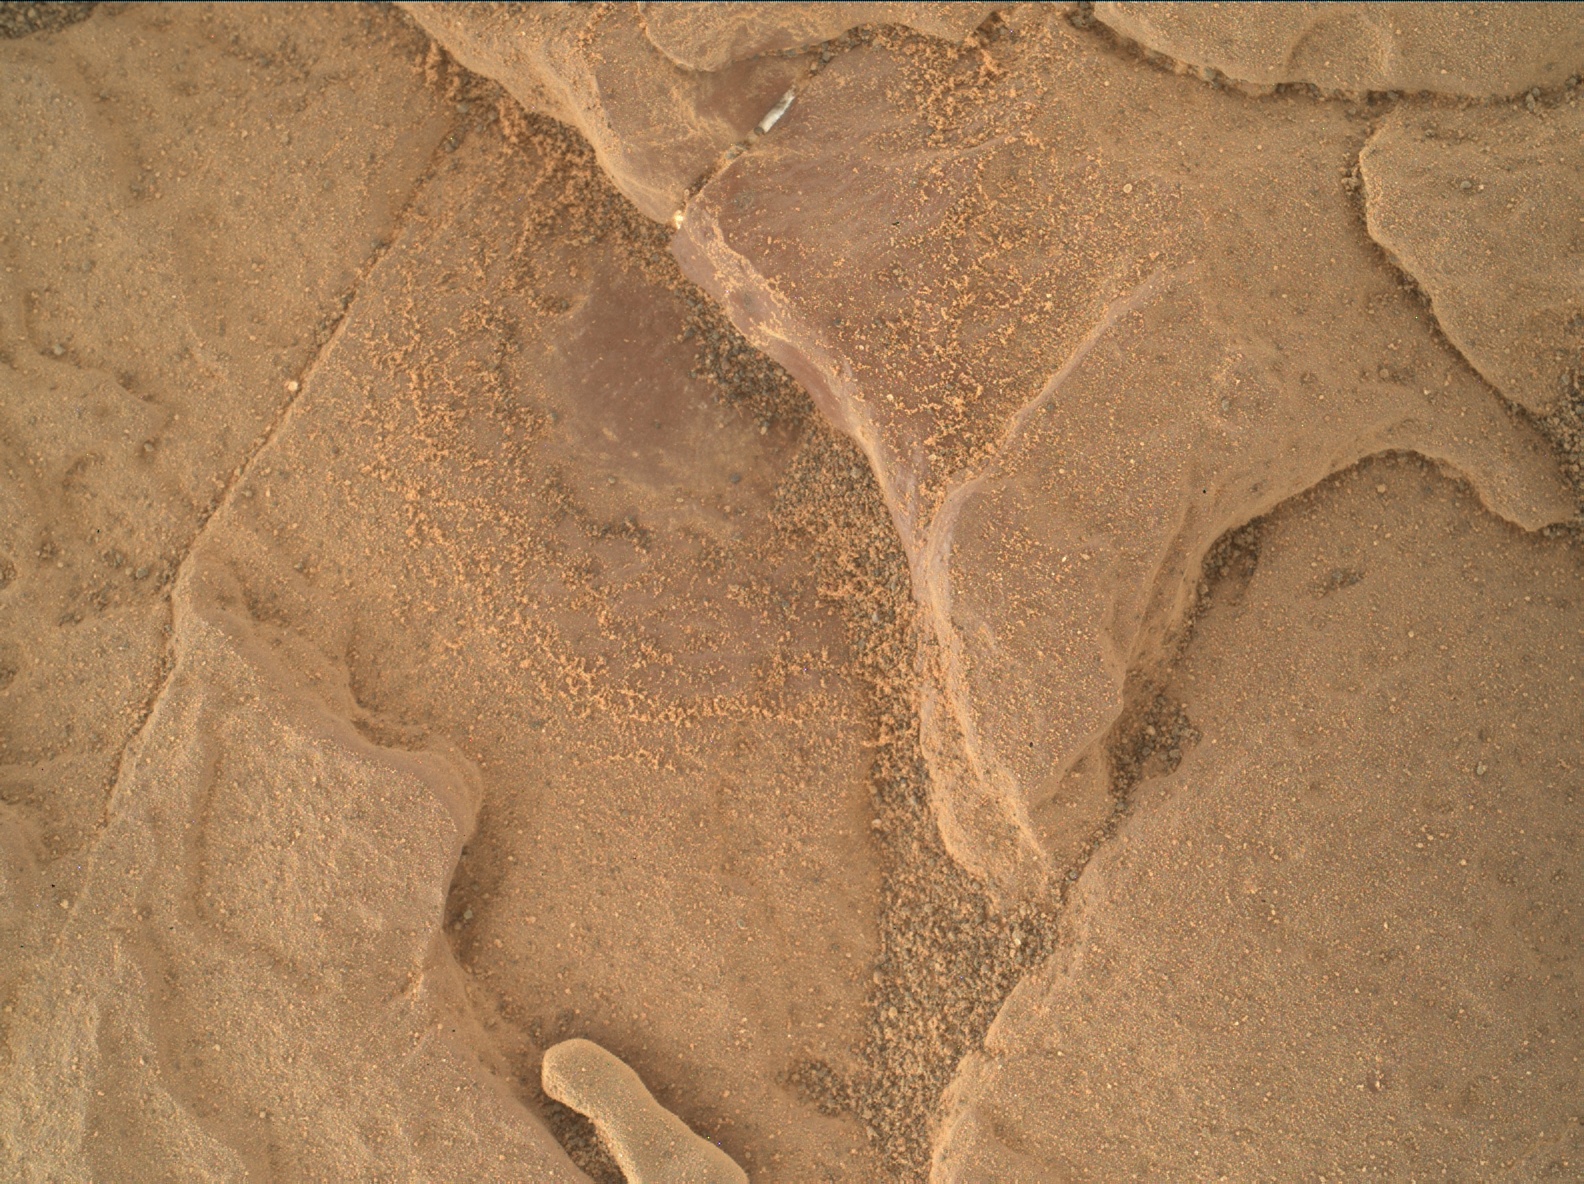 Nasa's Mars rover Curiosity acquired this image using its Mars Hand Lens Imager (MAHLI) on Sol 1870